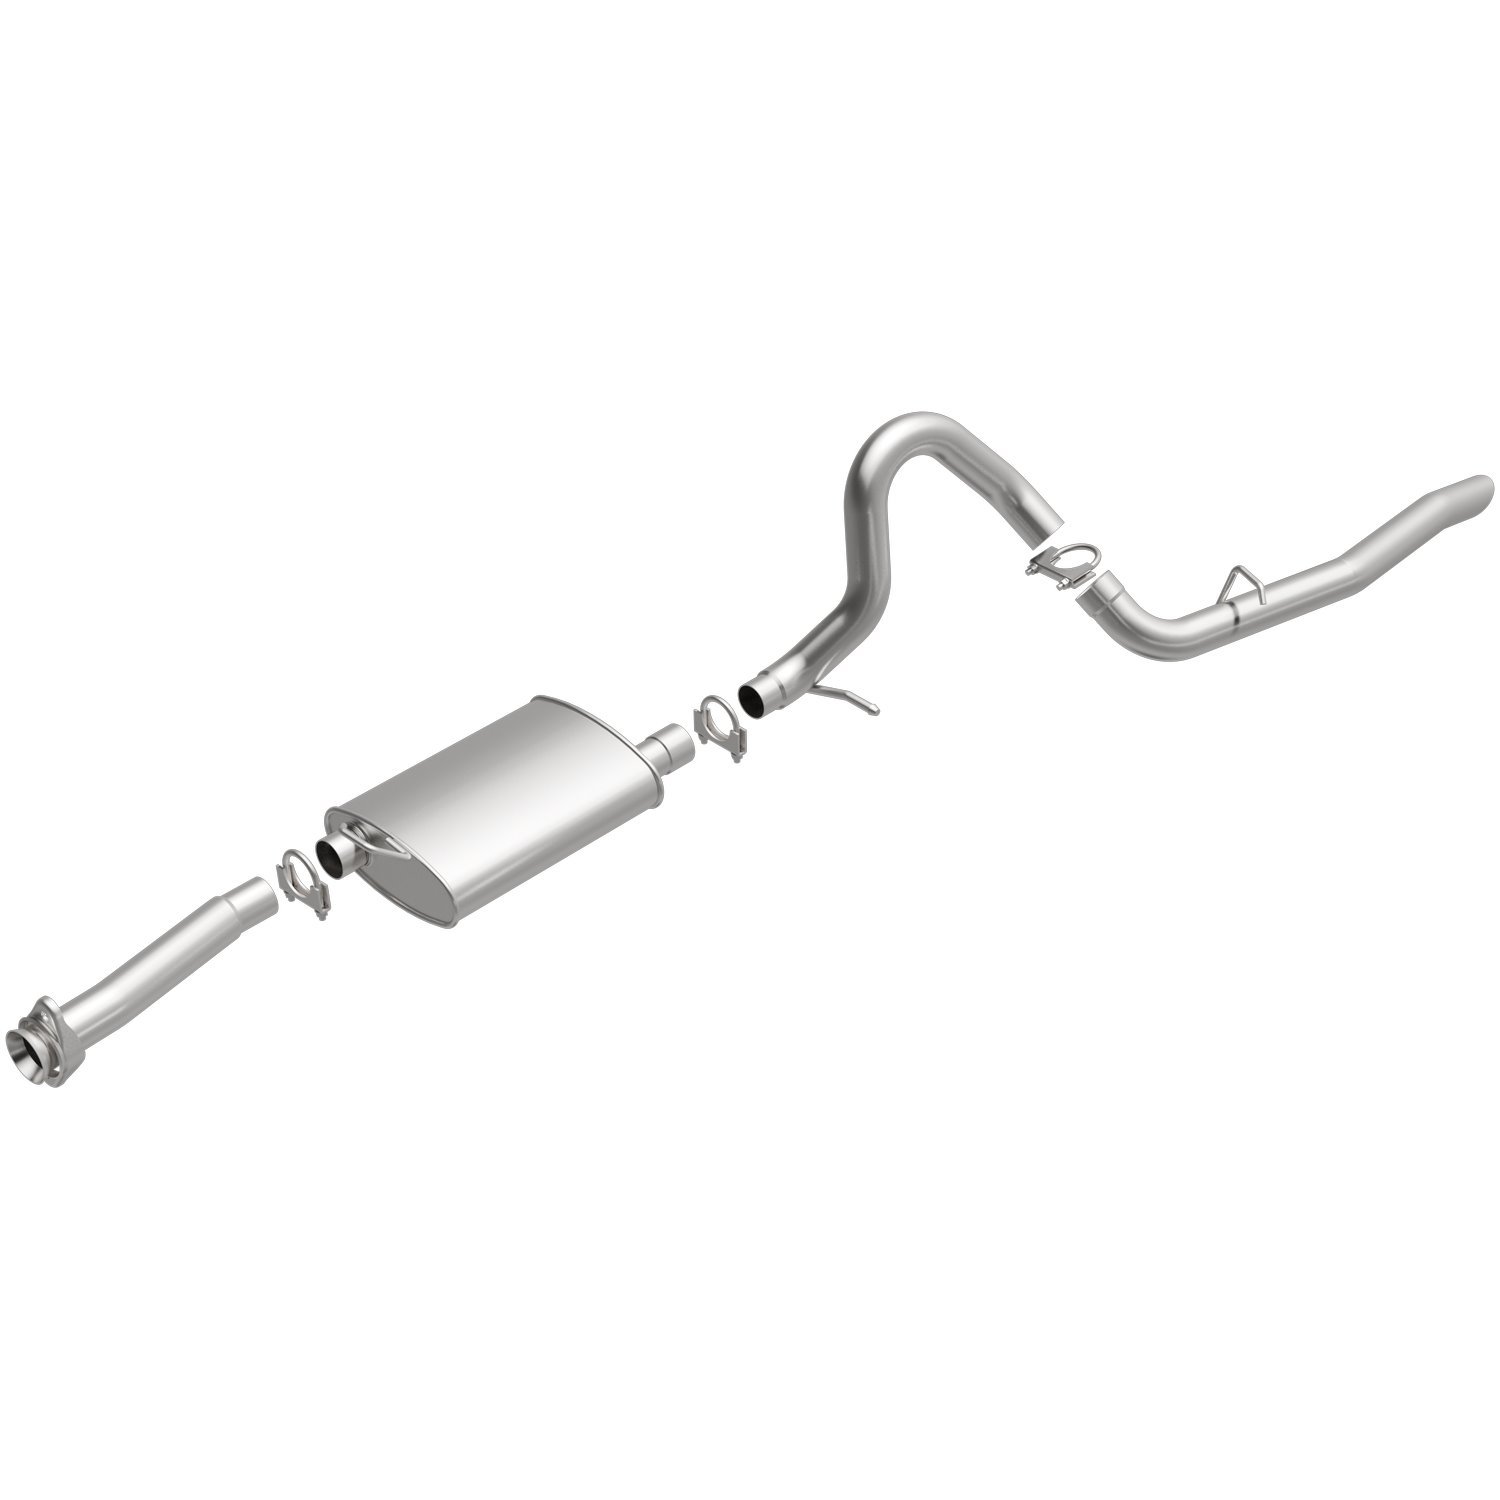 Direct-Fit Exhaust Kit, 1999-2004 Ford Mustang